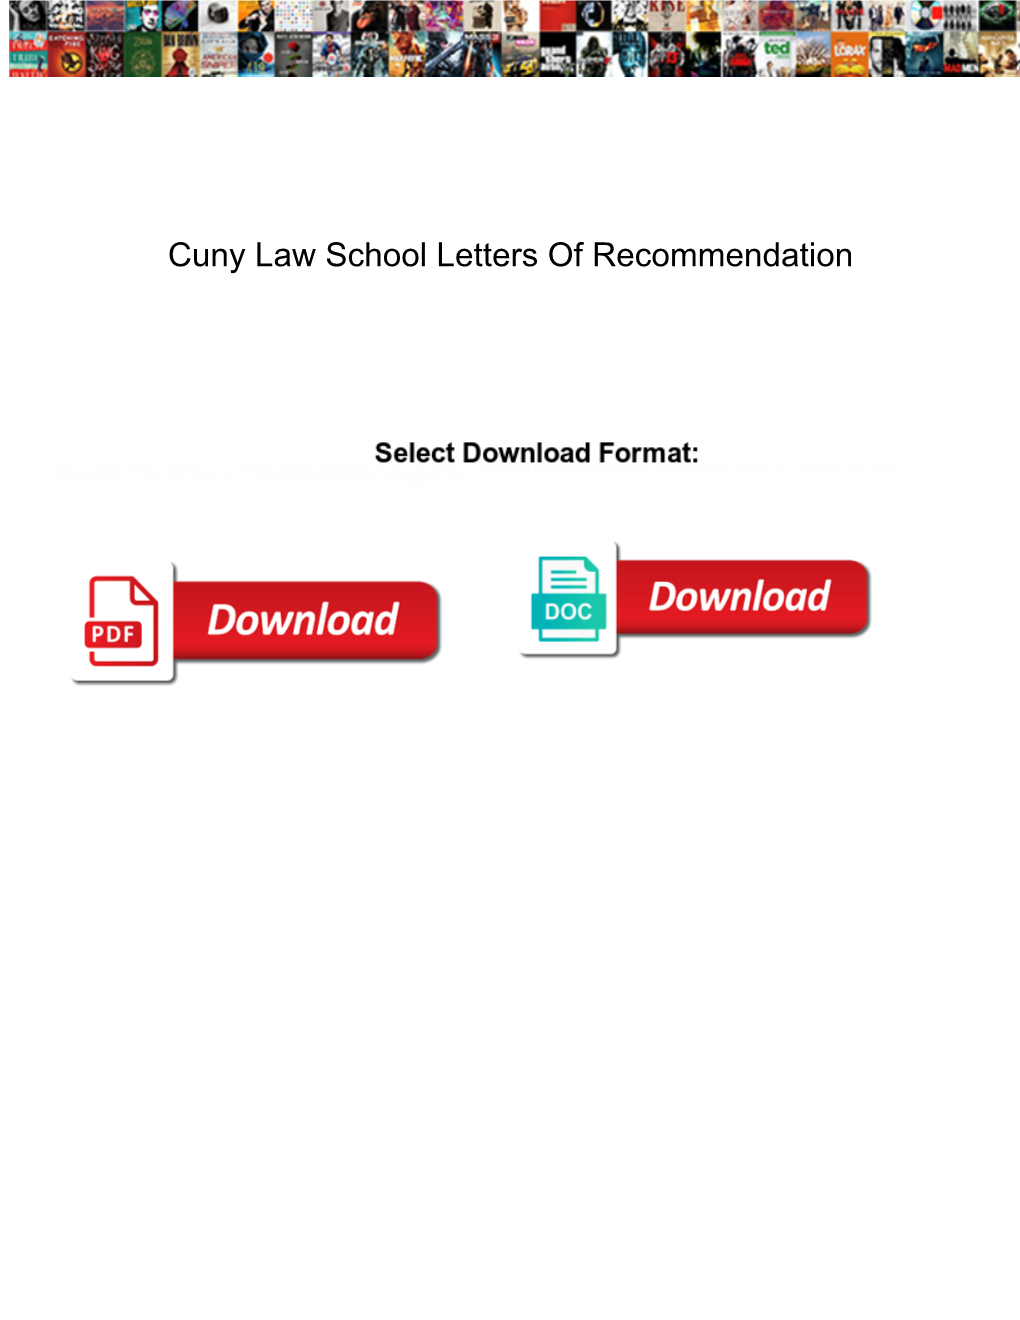 Cuny Law School Letters of Recommendation